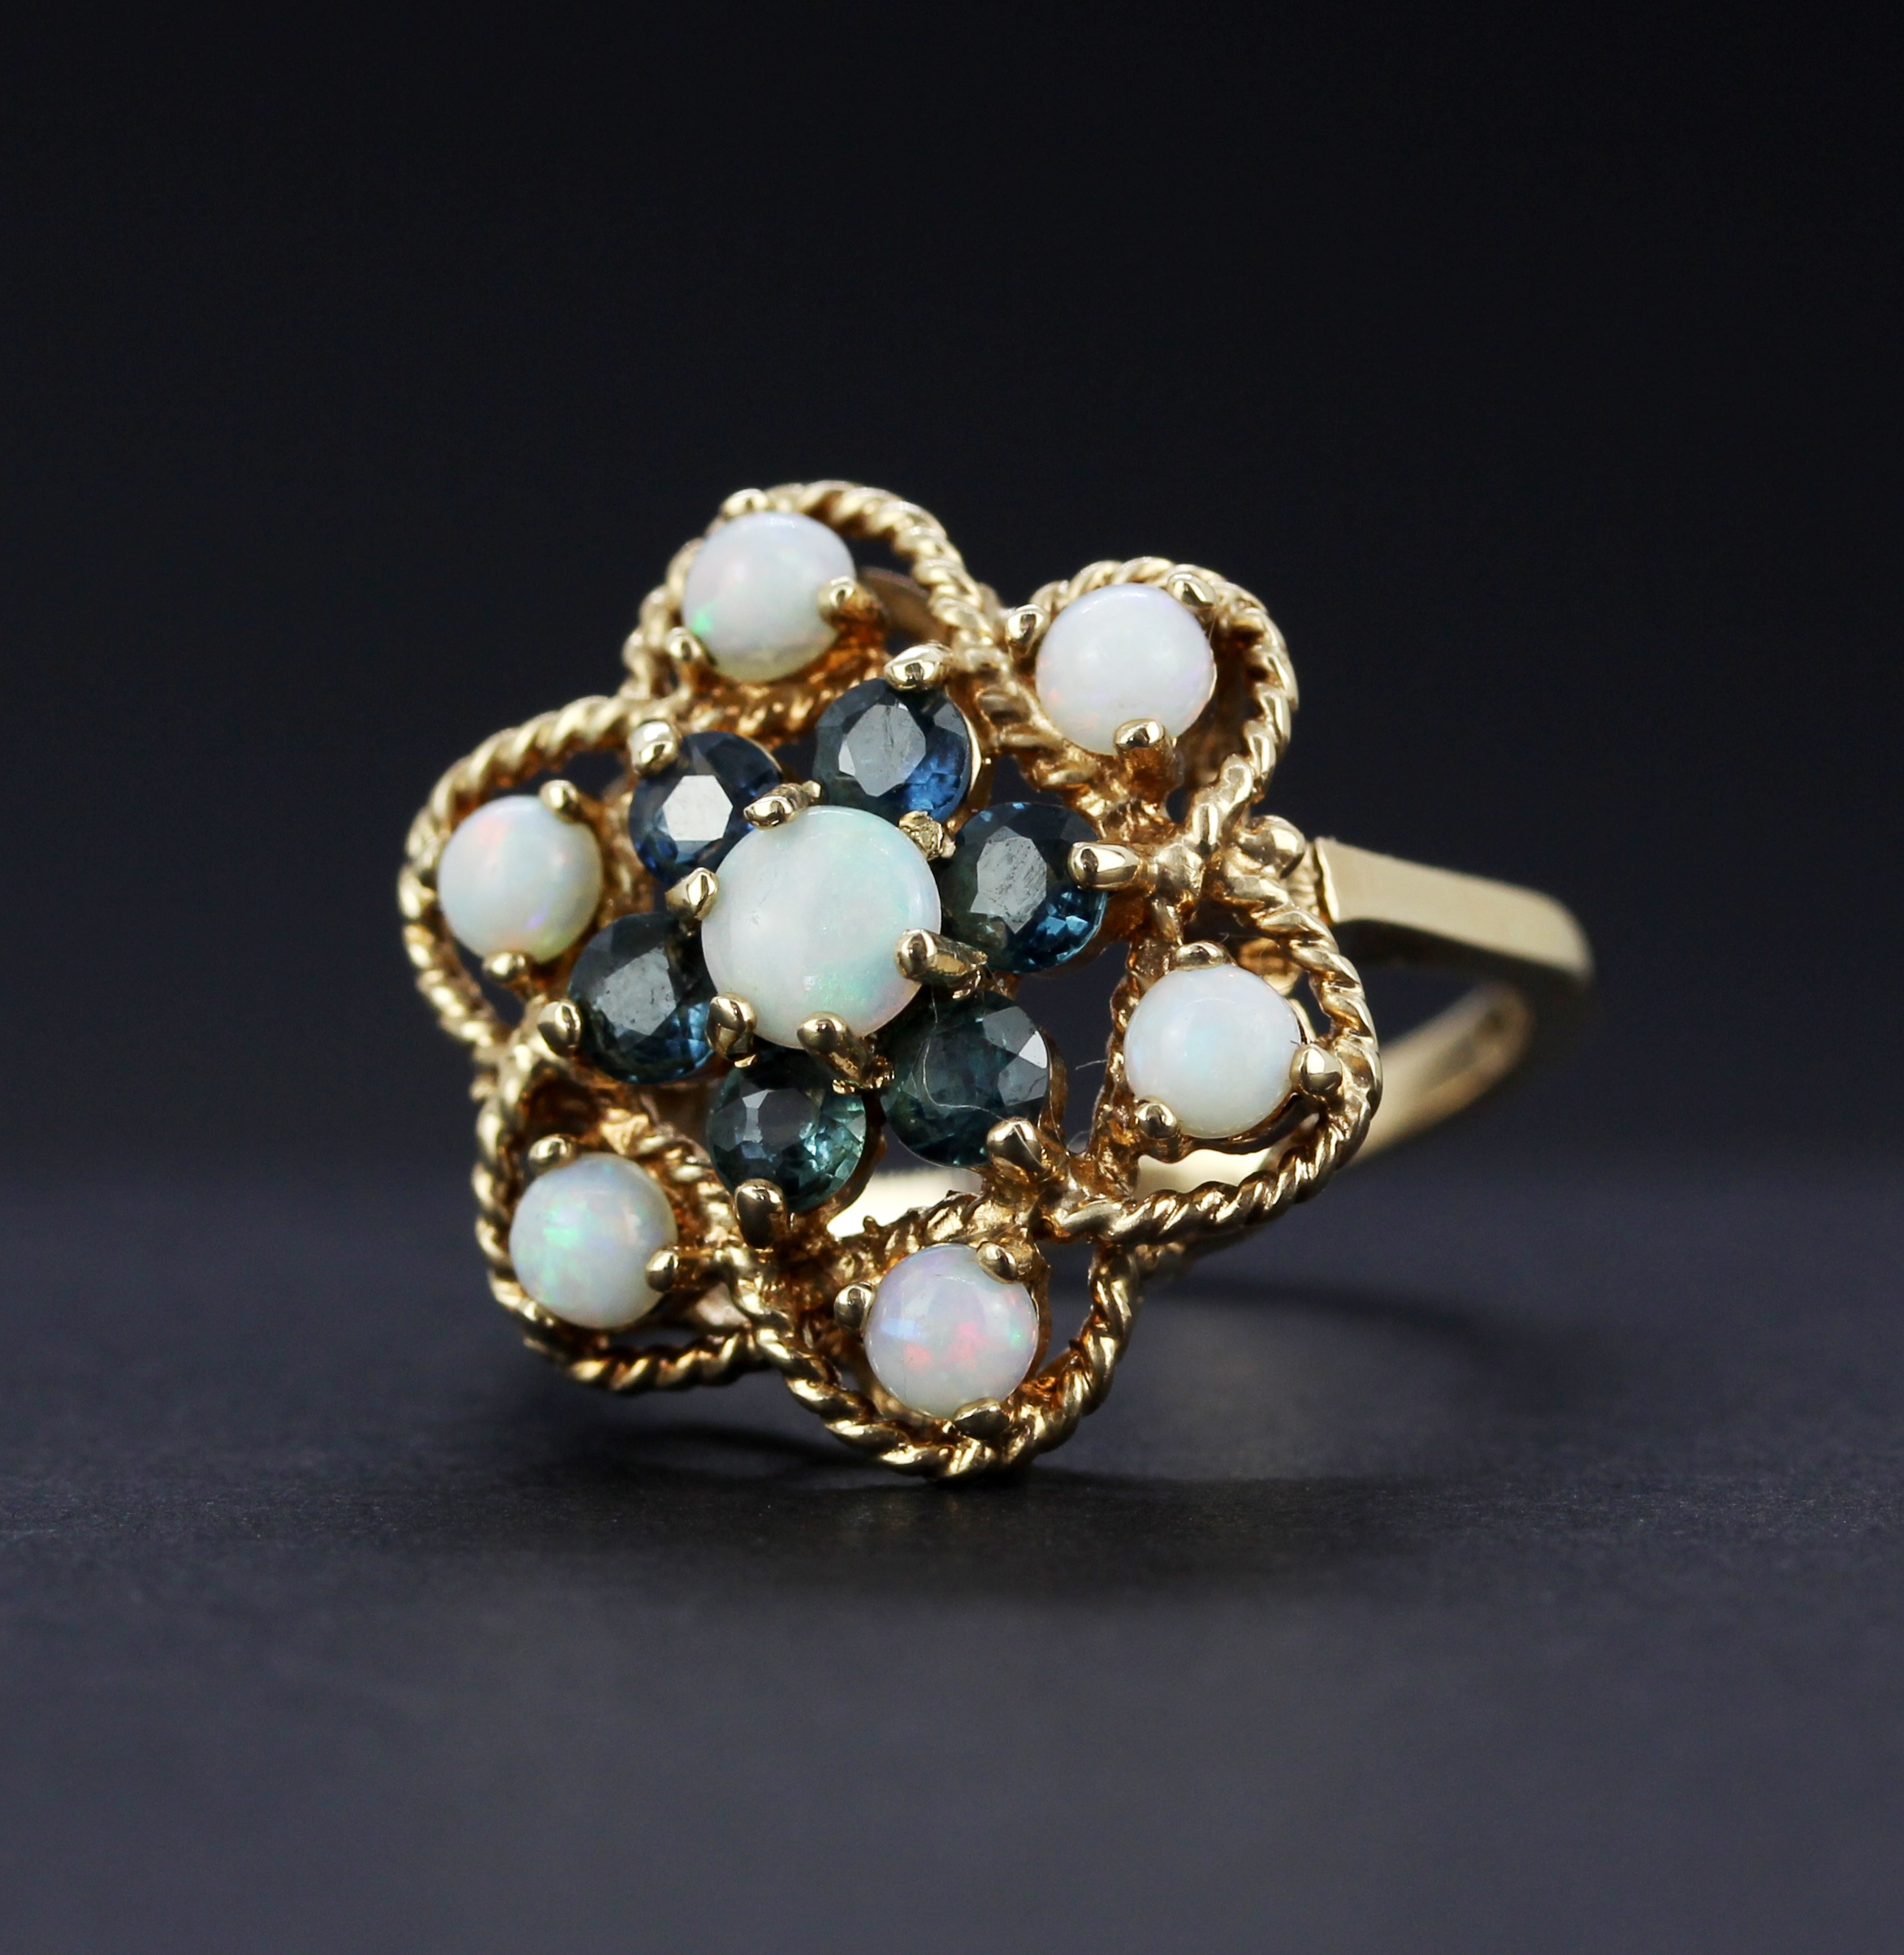 A large hallmarked (worn hallmark) 9ct yellow gold ring set with round cabochon cut opals and